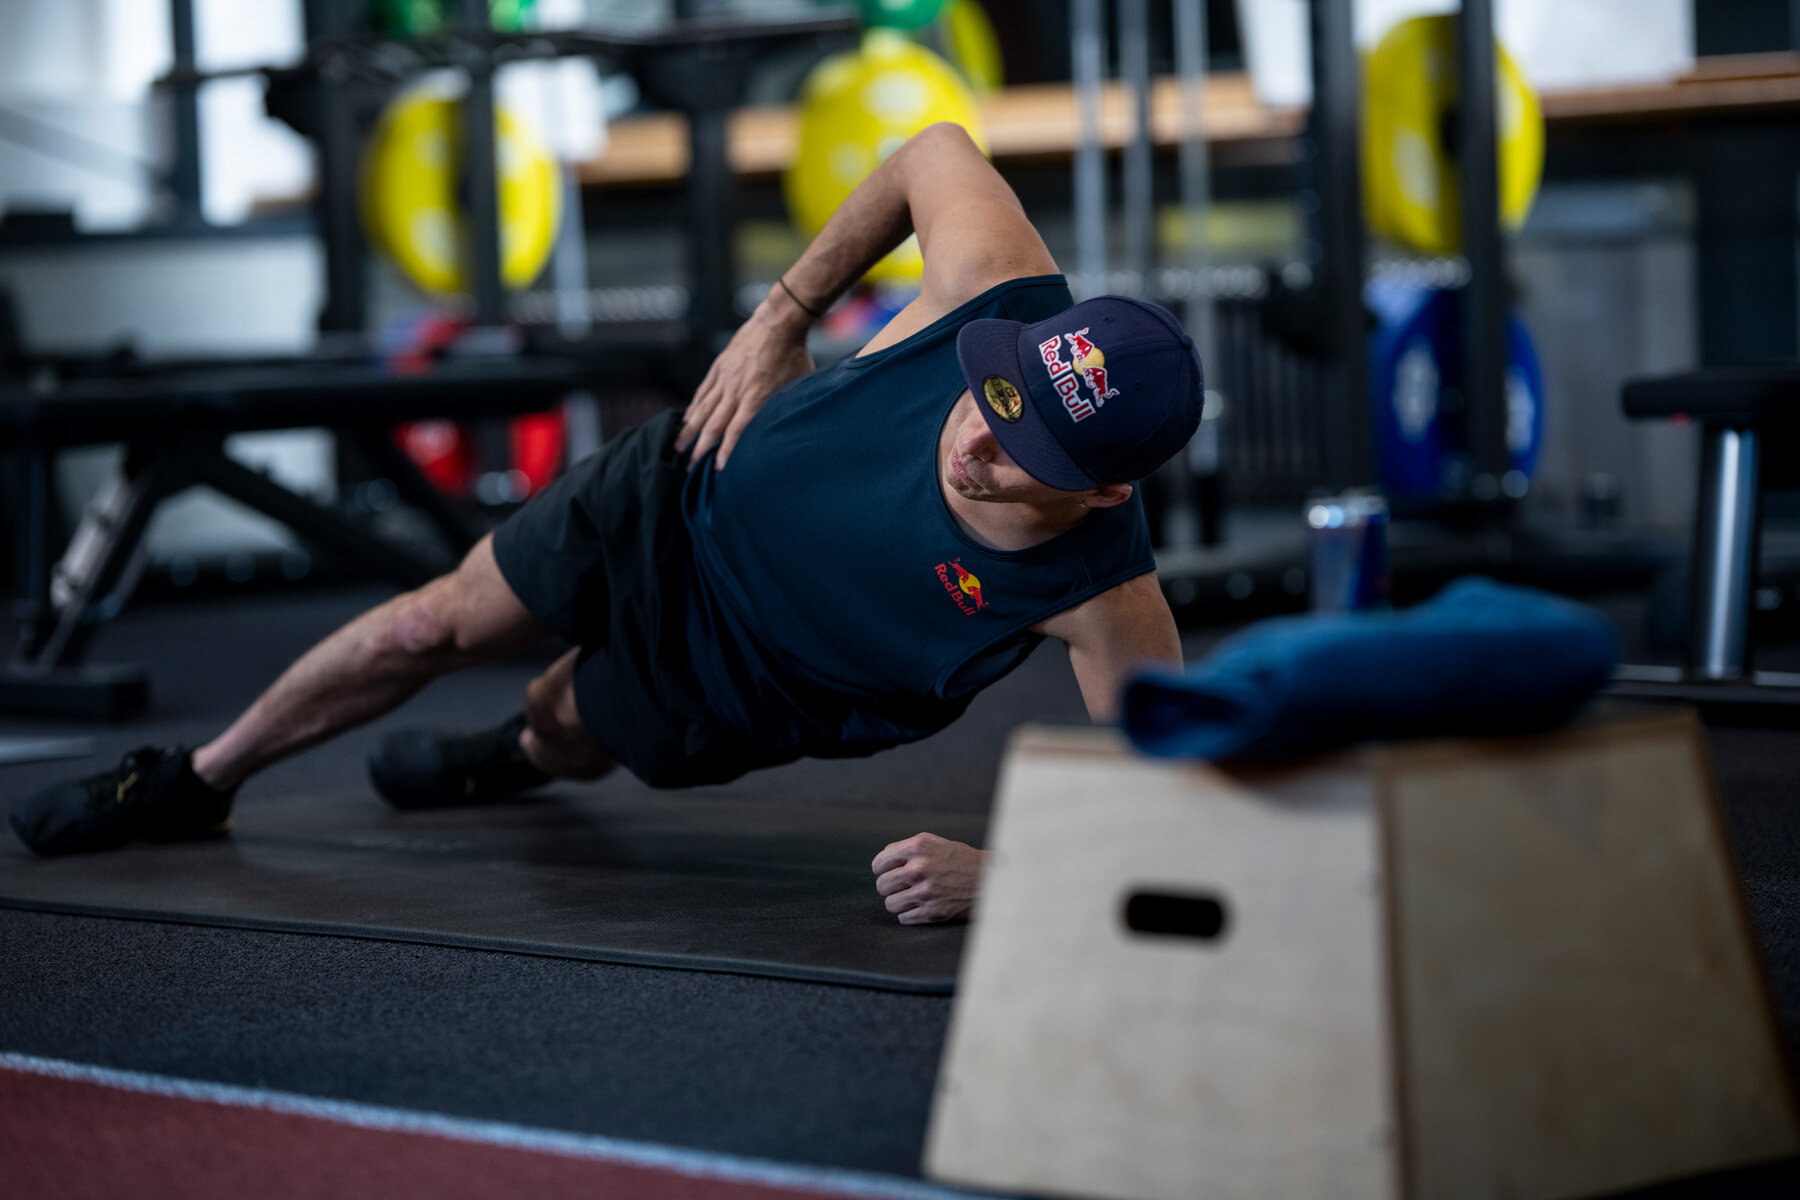  Daniel Dhers is seen during his visit to the Red Bull Athlete Performance Center in Salzburg on Febreruary 14, 2020 